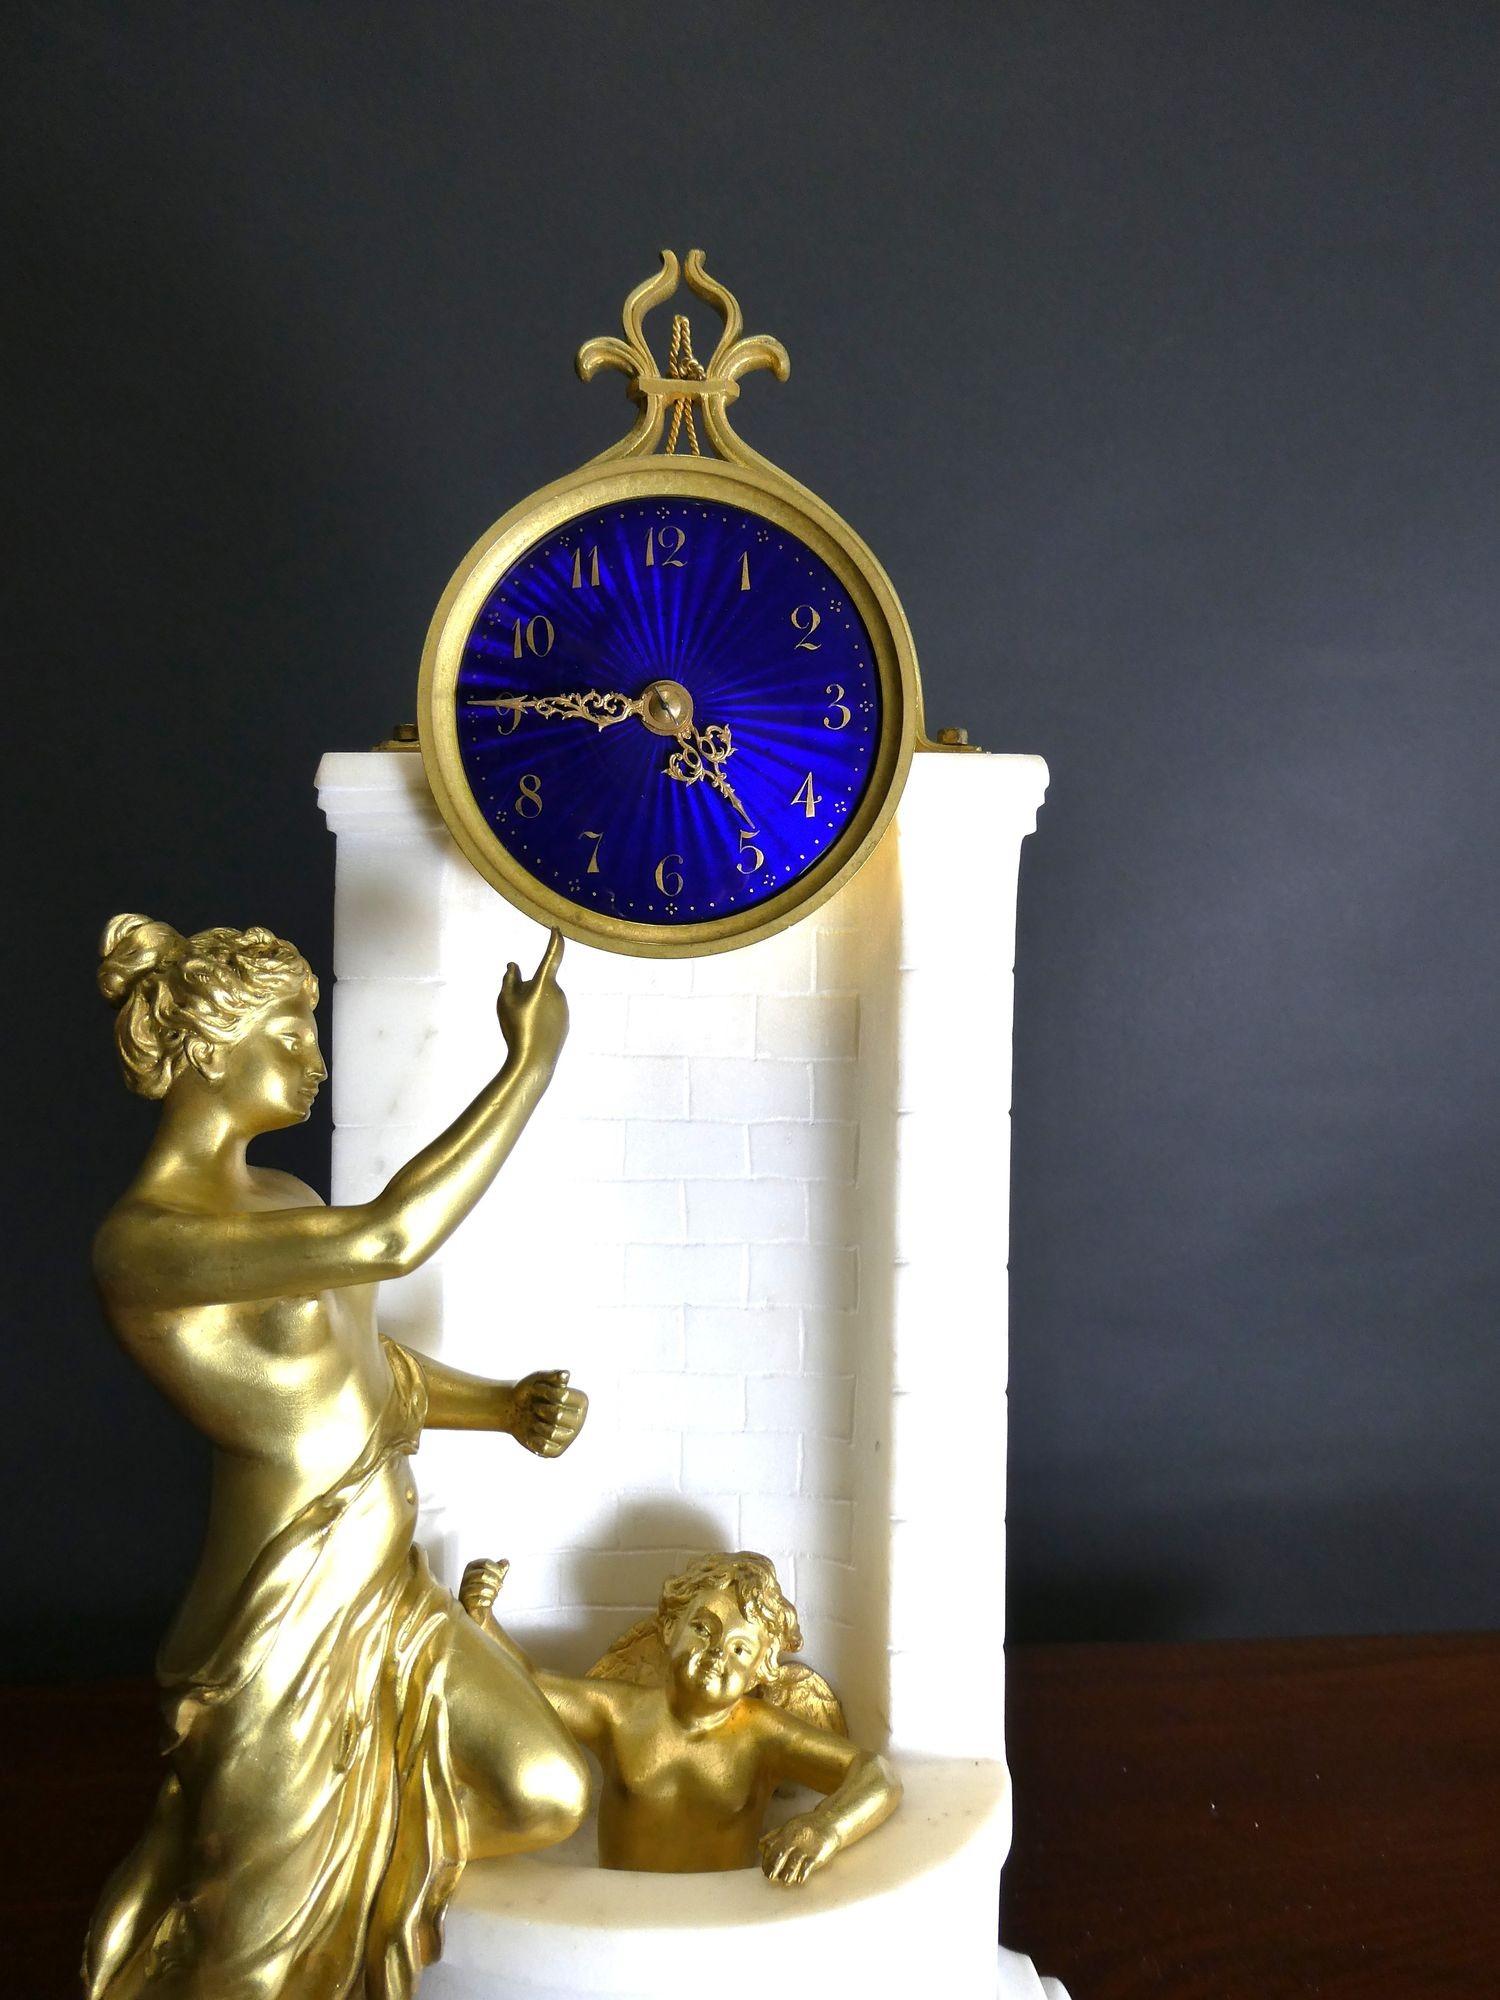 French White Marble and Ormolu Mantel Clock
Housed in a white marble figural case depicting a wall fountain with Cupid in the basin and Venus standing beside indicating the time, surmounted by a decorative ormolu mount.
Fine blue dial with gilded